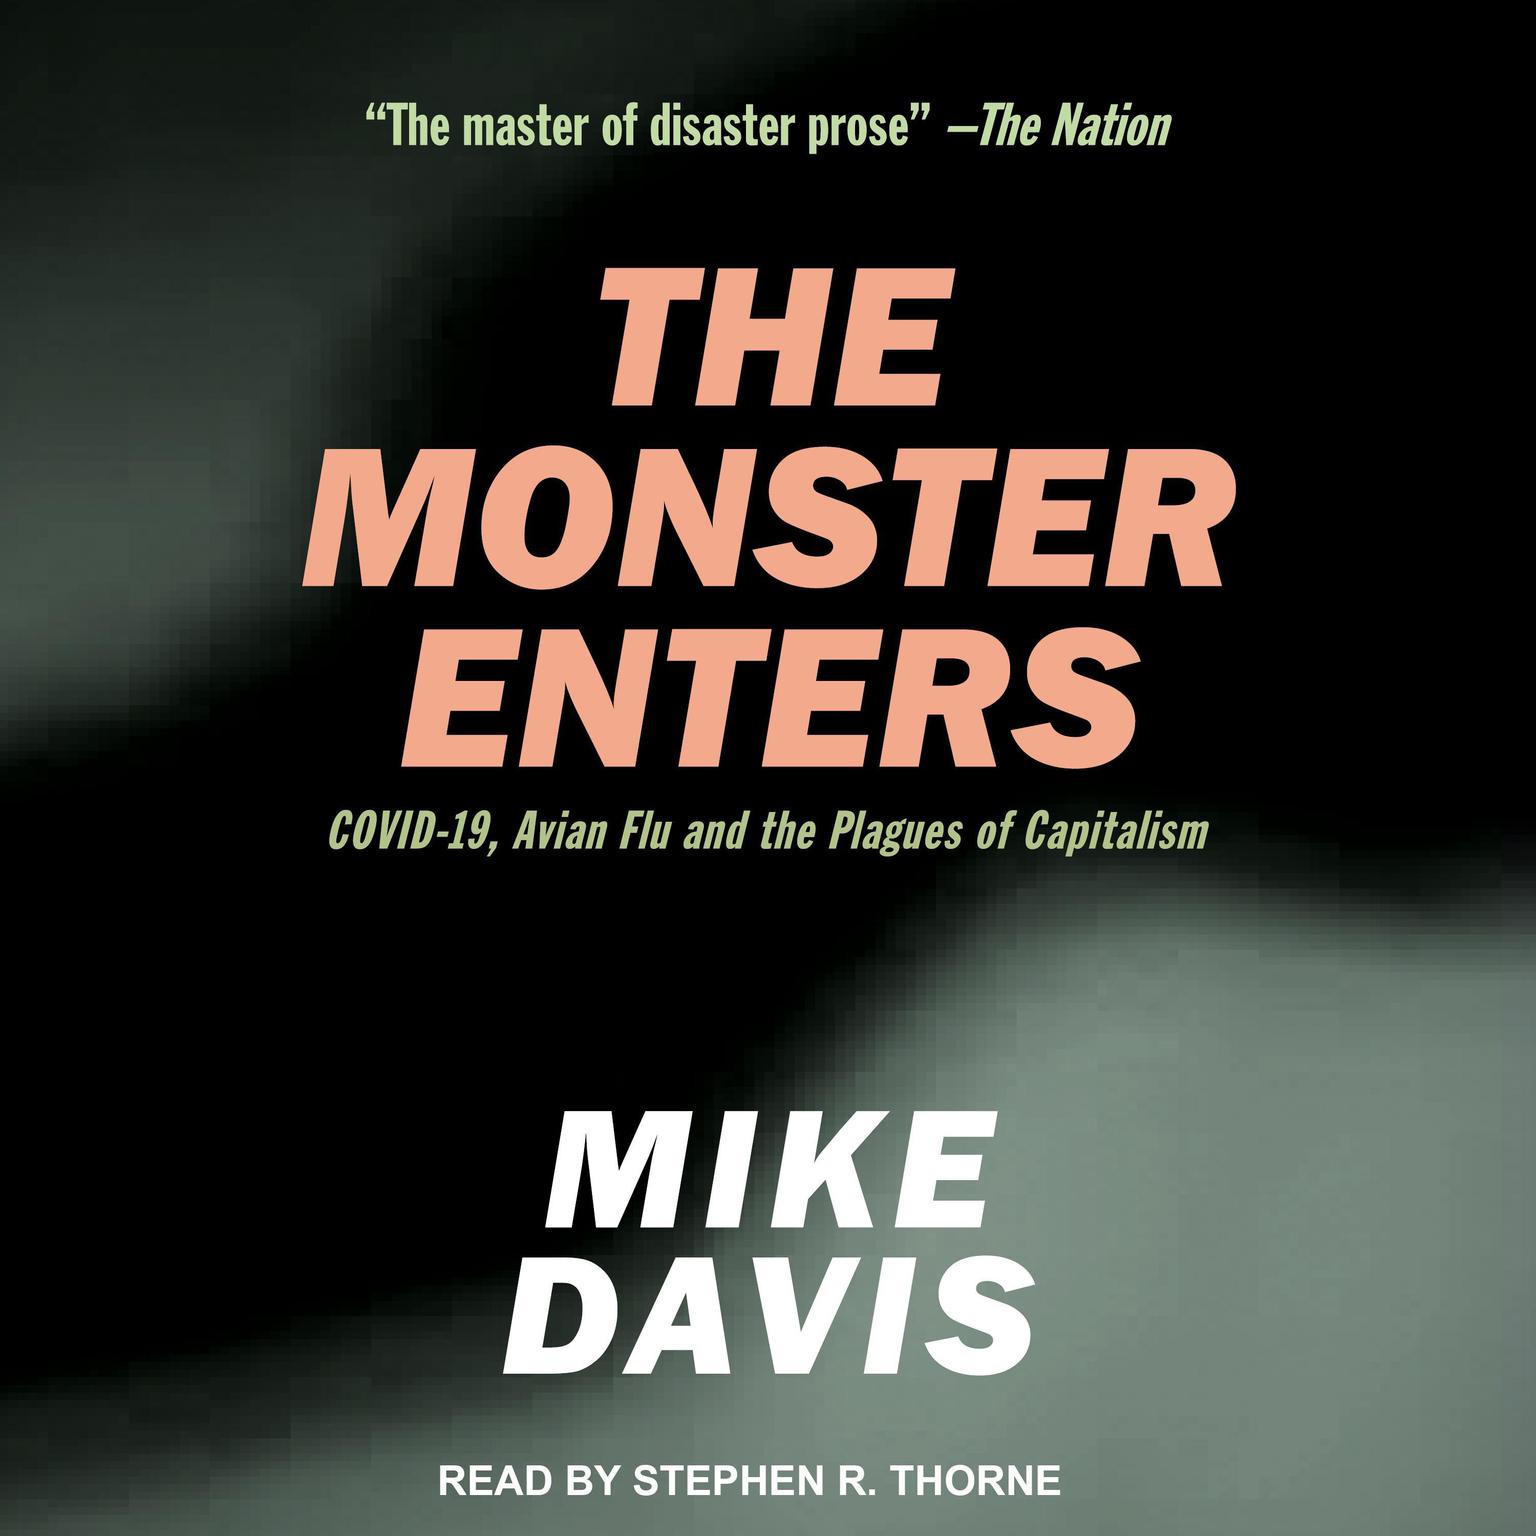 The Monster Enters: COVID-19, AVIAN FLU AND THE PLAGUES OF CAPITALISM Audiobook, by Mike Davis